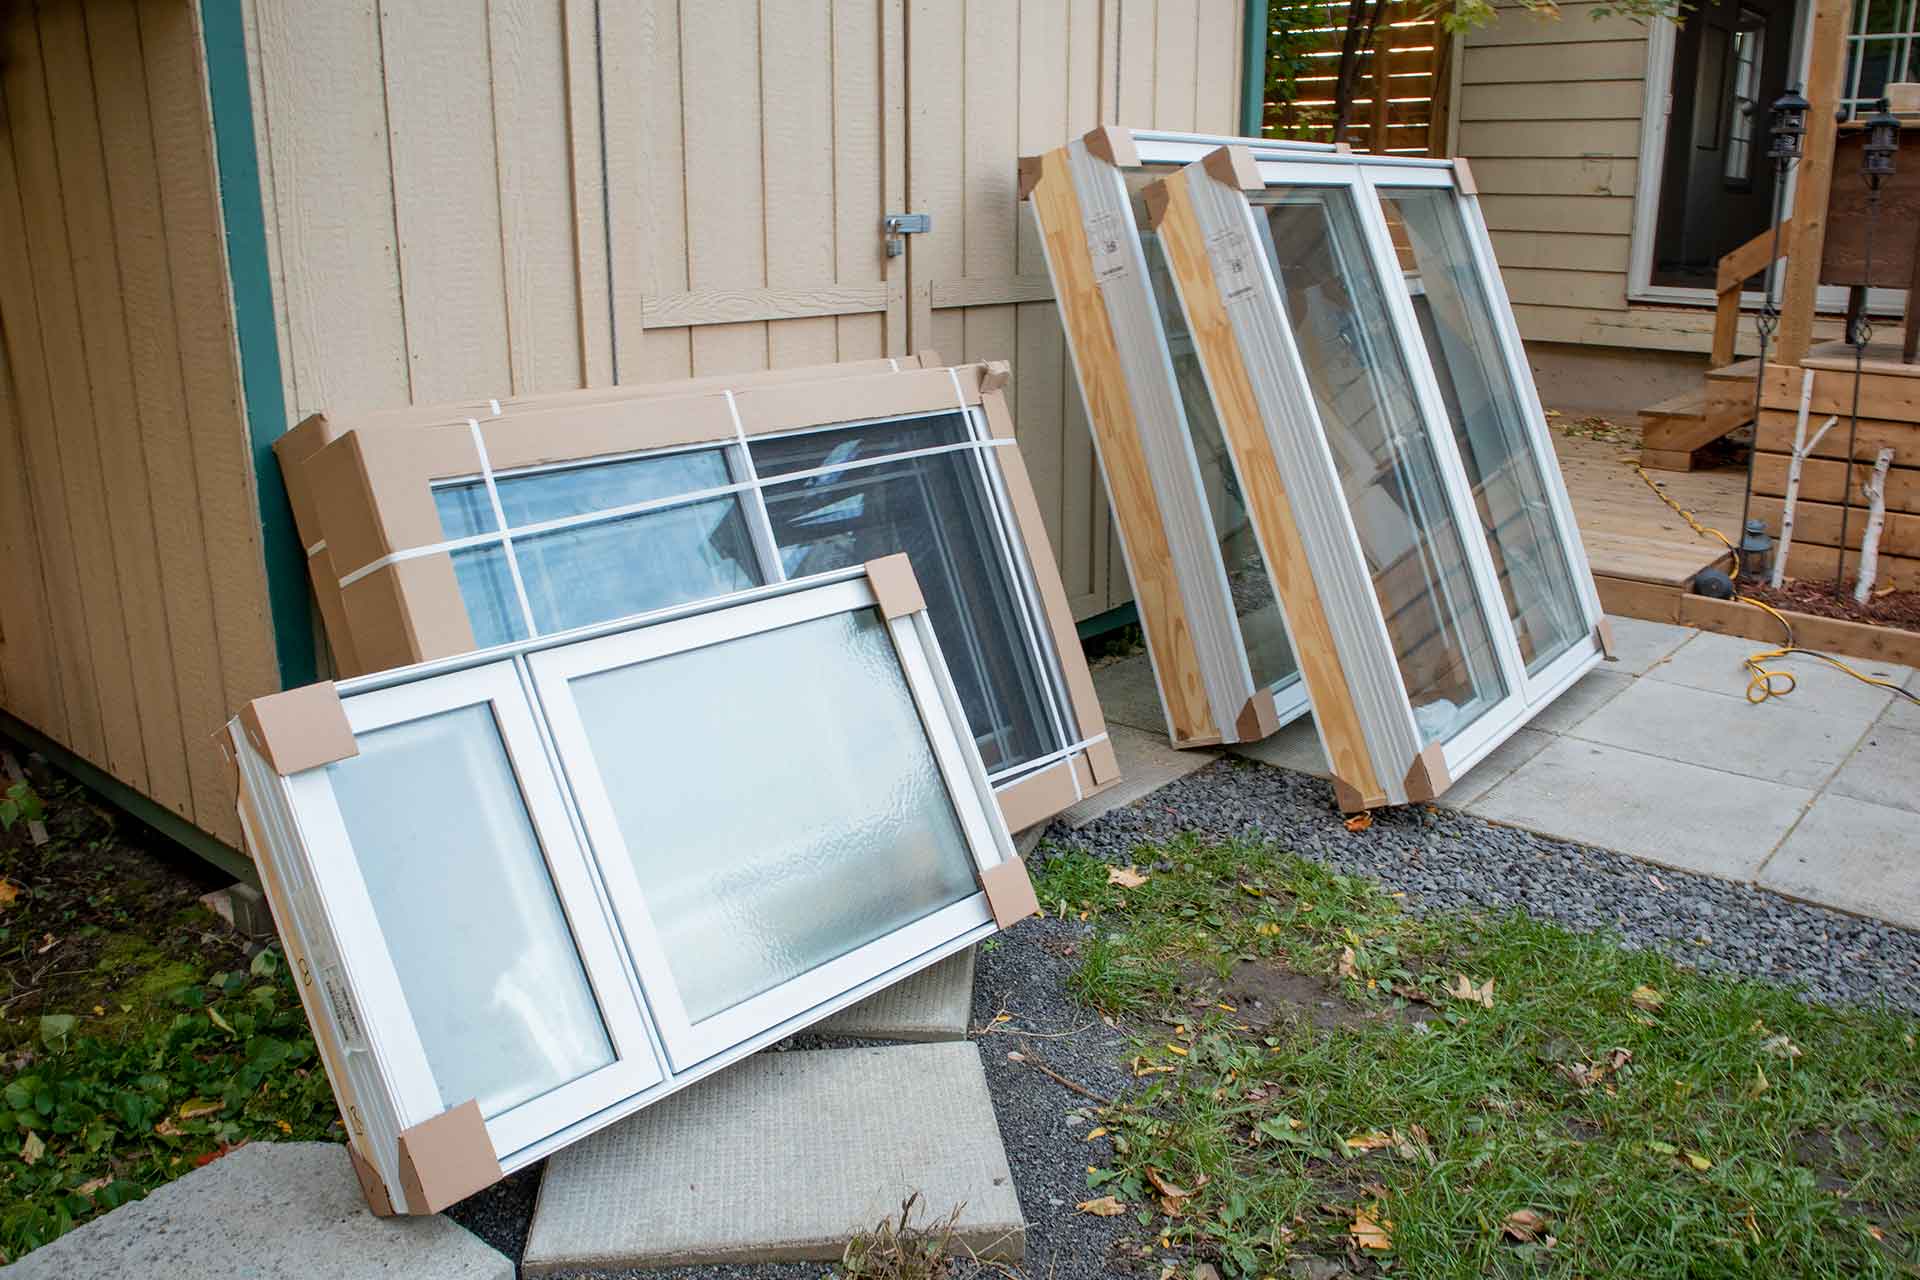 Replacement windows leaning up against a shed, awaiting installation.